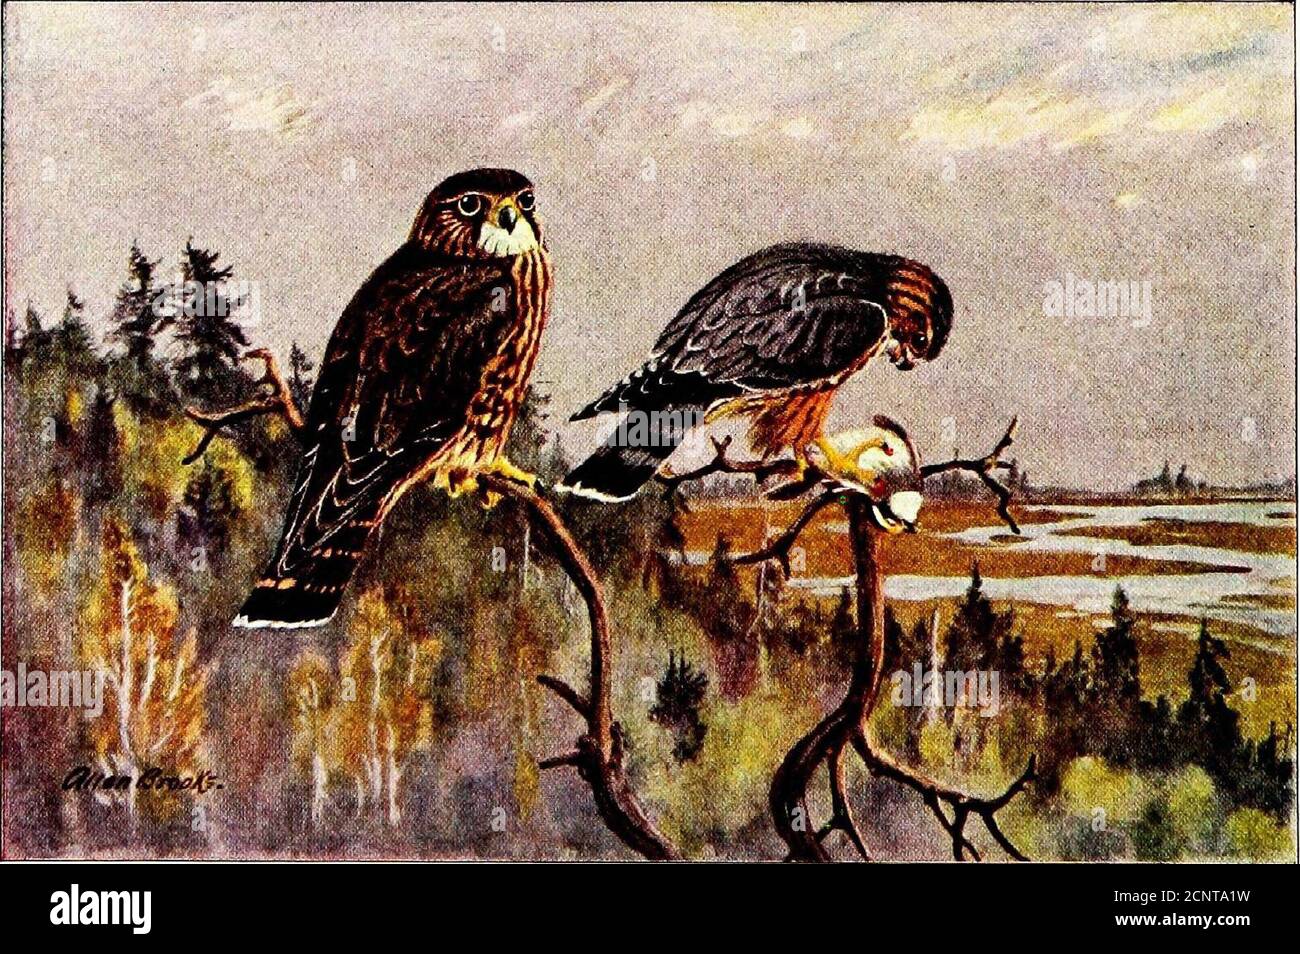 . Falconry, the sport of kings . ) National Geoffraphii. Society raphii. Society , - a Ulipcr; male (ri,!L,hl)female in nesting- hole X , (A^aK* ^sn« Sv^WiVvXvi-£S Nov ^-H-vK^I ^ V)cw. &gt;aeV ^eV ^^i^-^ ISV [( ! tinp silh natural size An Stock Photo